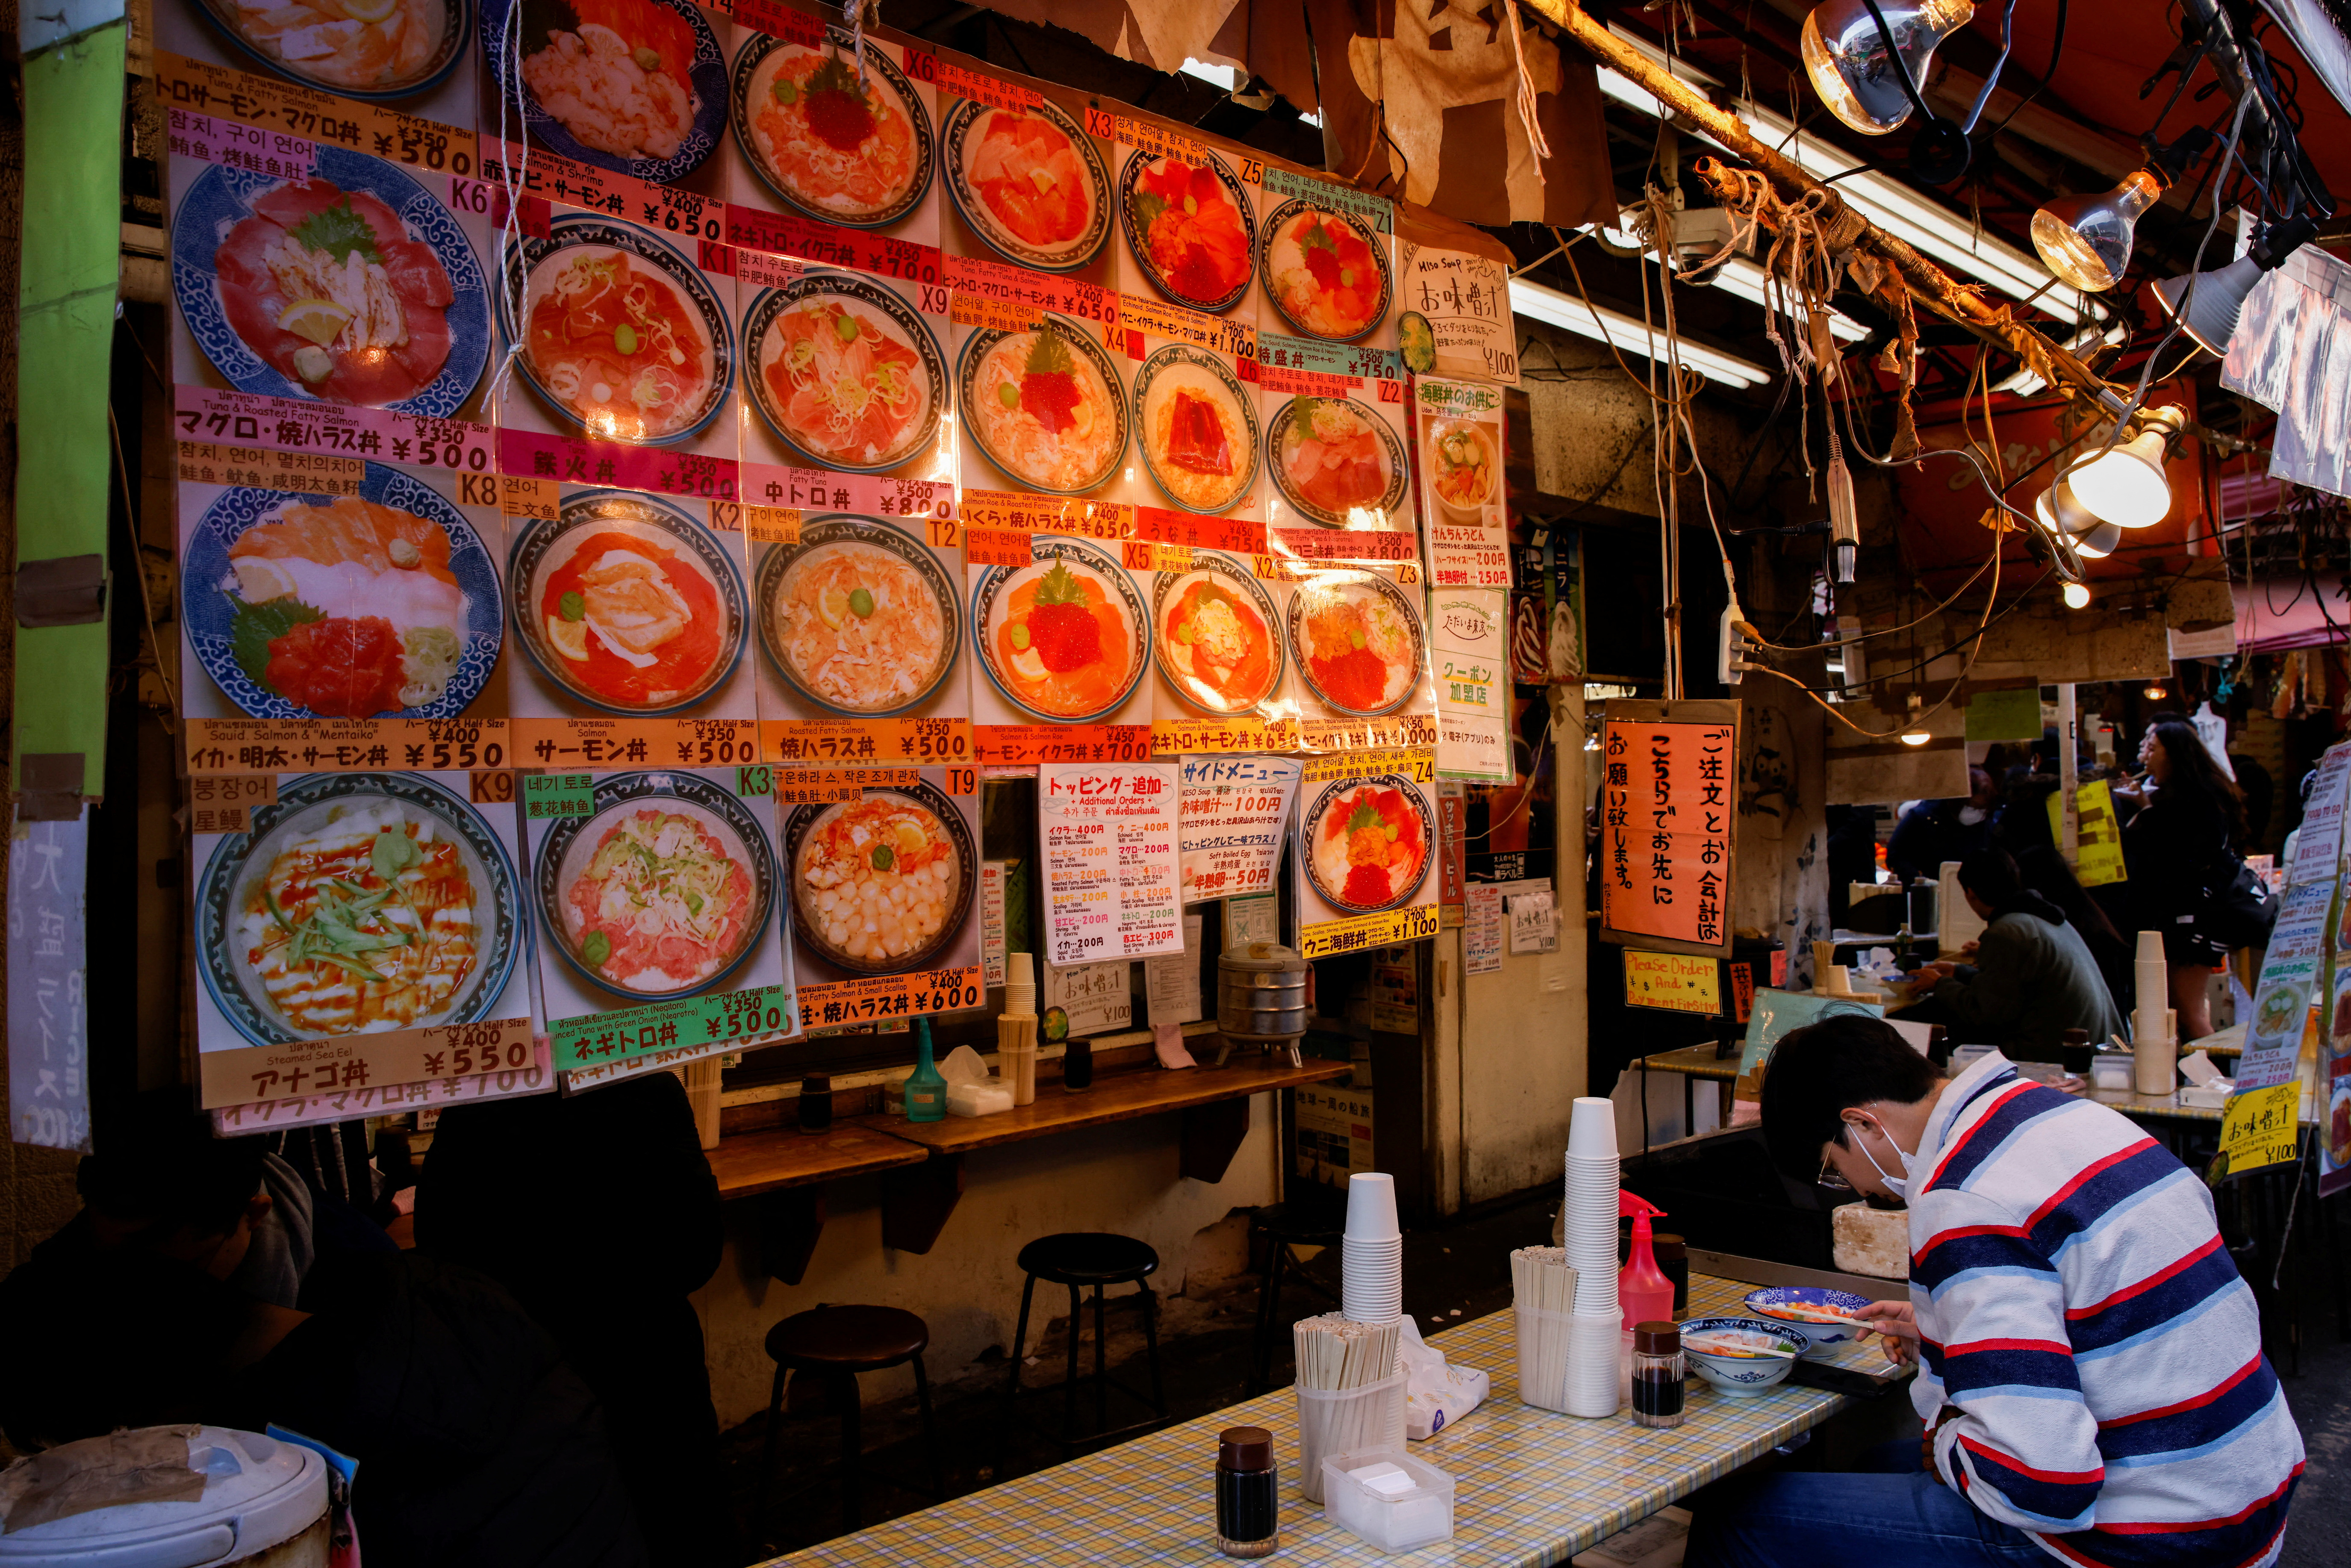 Man eats under menu pictures with prices, at a restaurant of a market in Tokyo